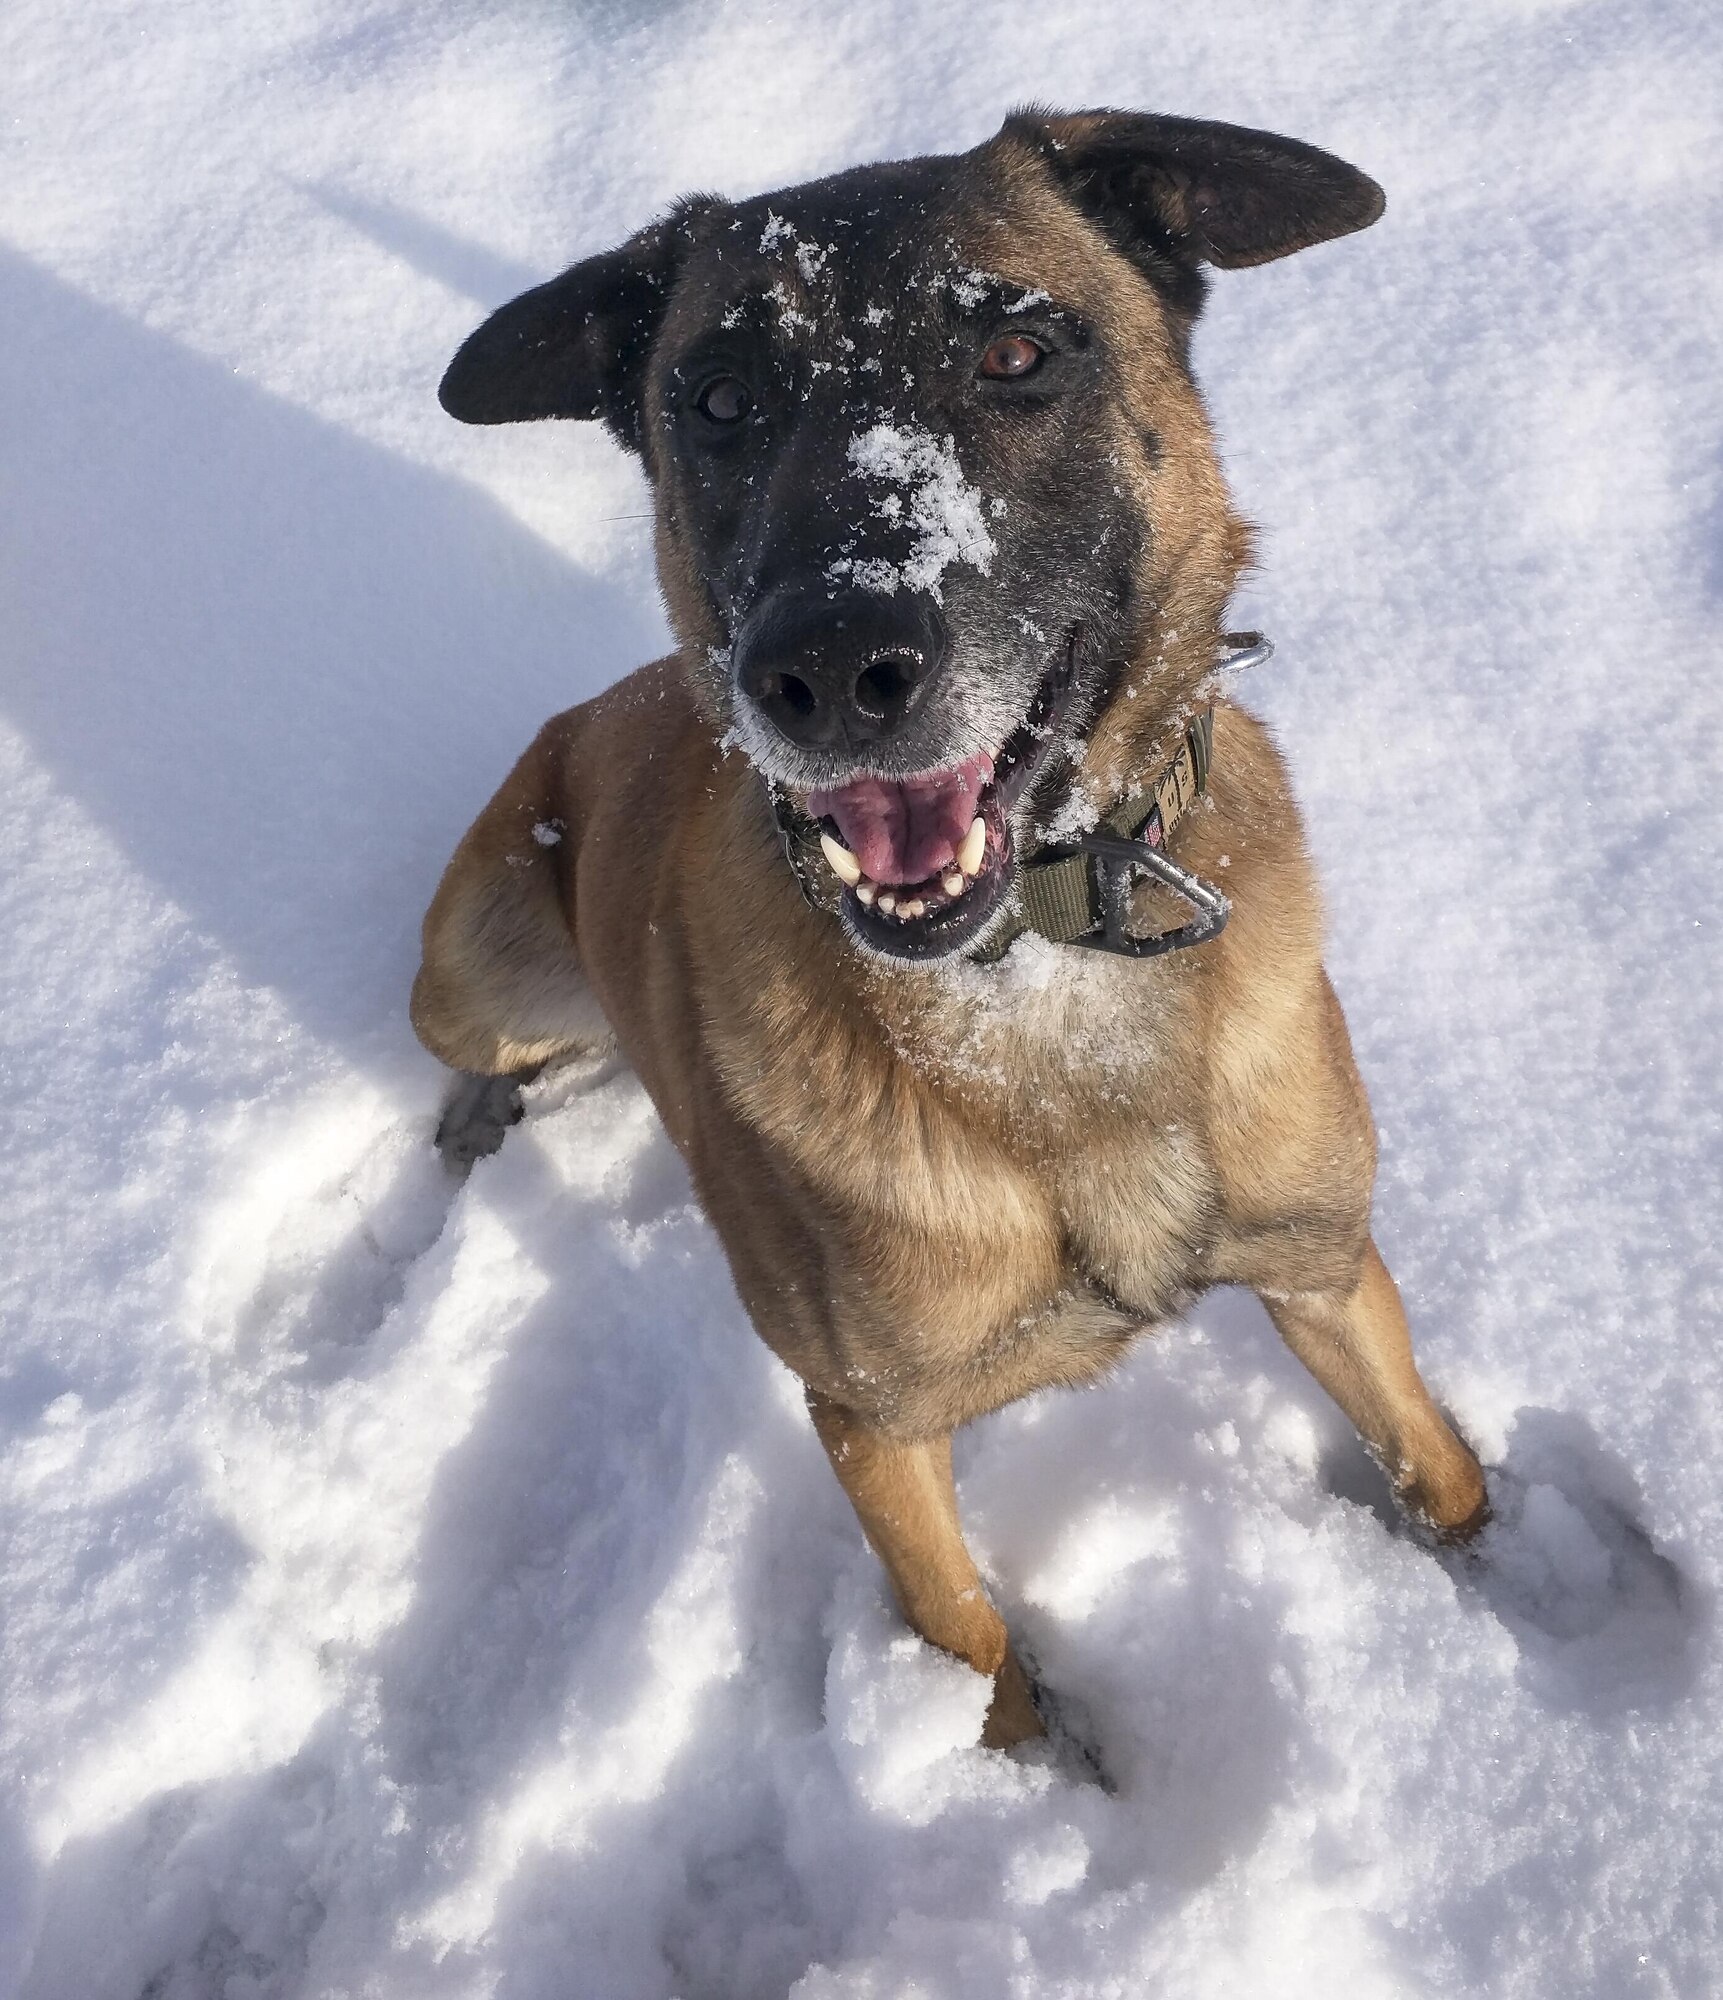 Vvass, 366th Security Forces military working dog, plays in the snow Nov. 11, 2015, at Mountain Home Air Force Base, Idaho. Vvass enjoyed having fun and being the "goofy" dog. (Courtesy Photo)